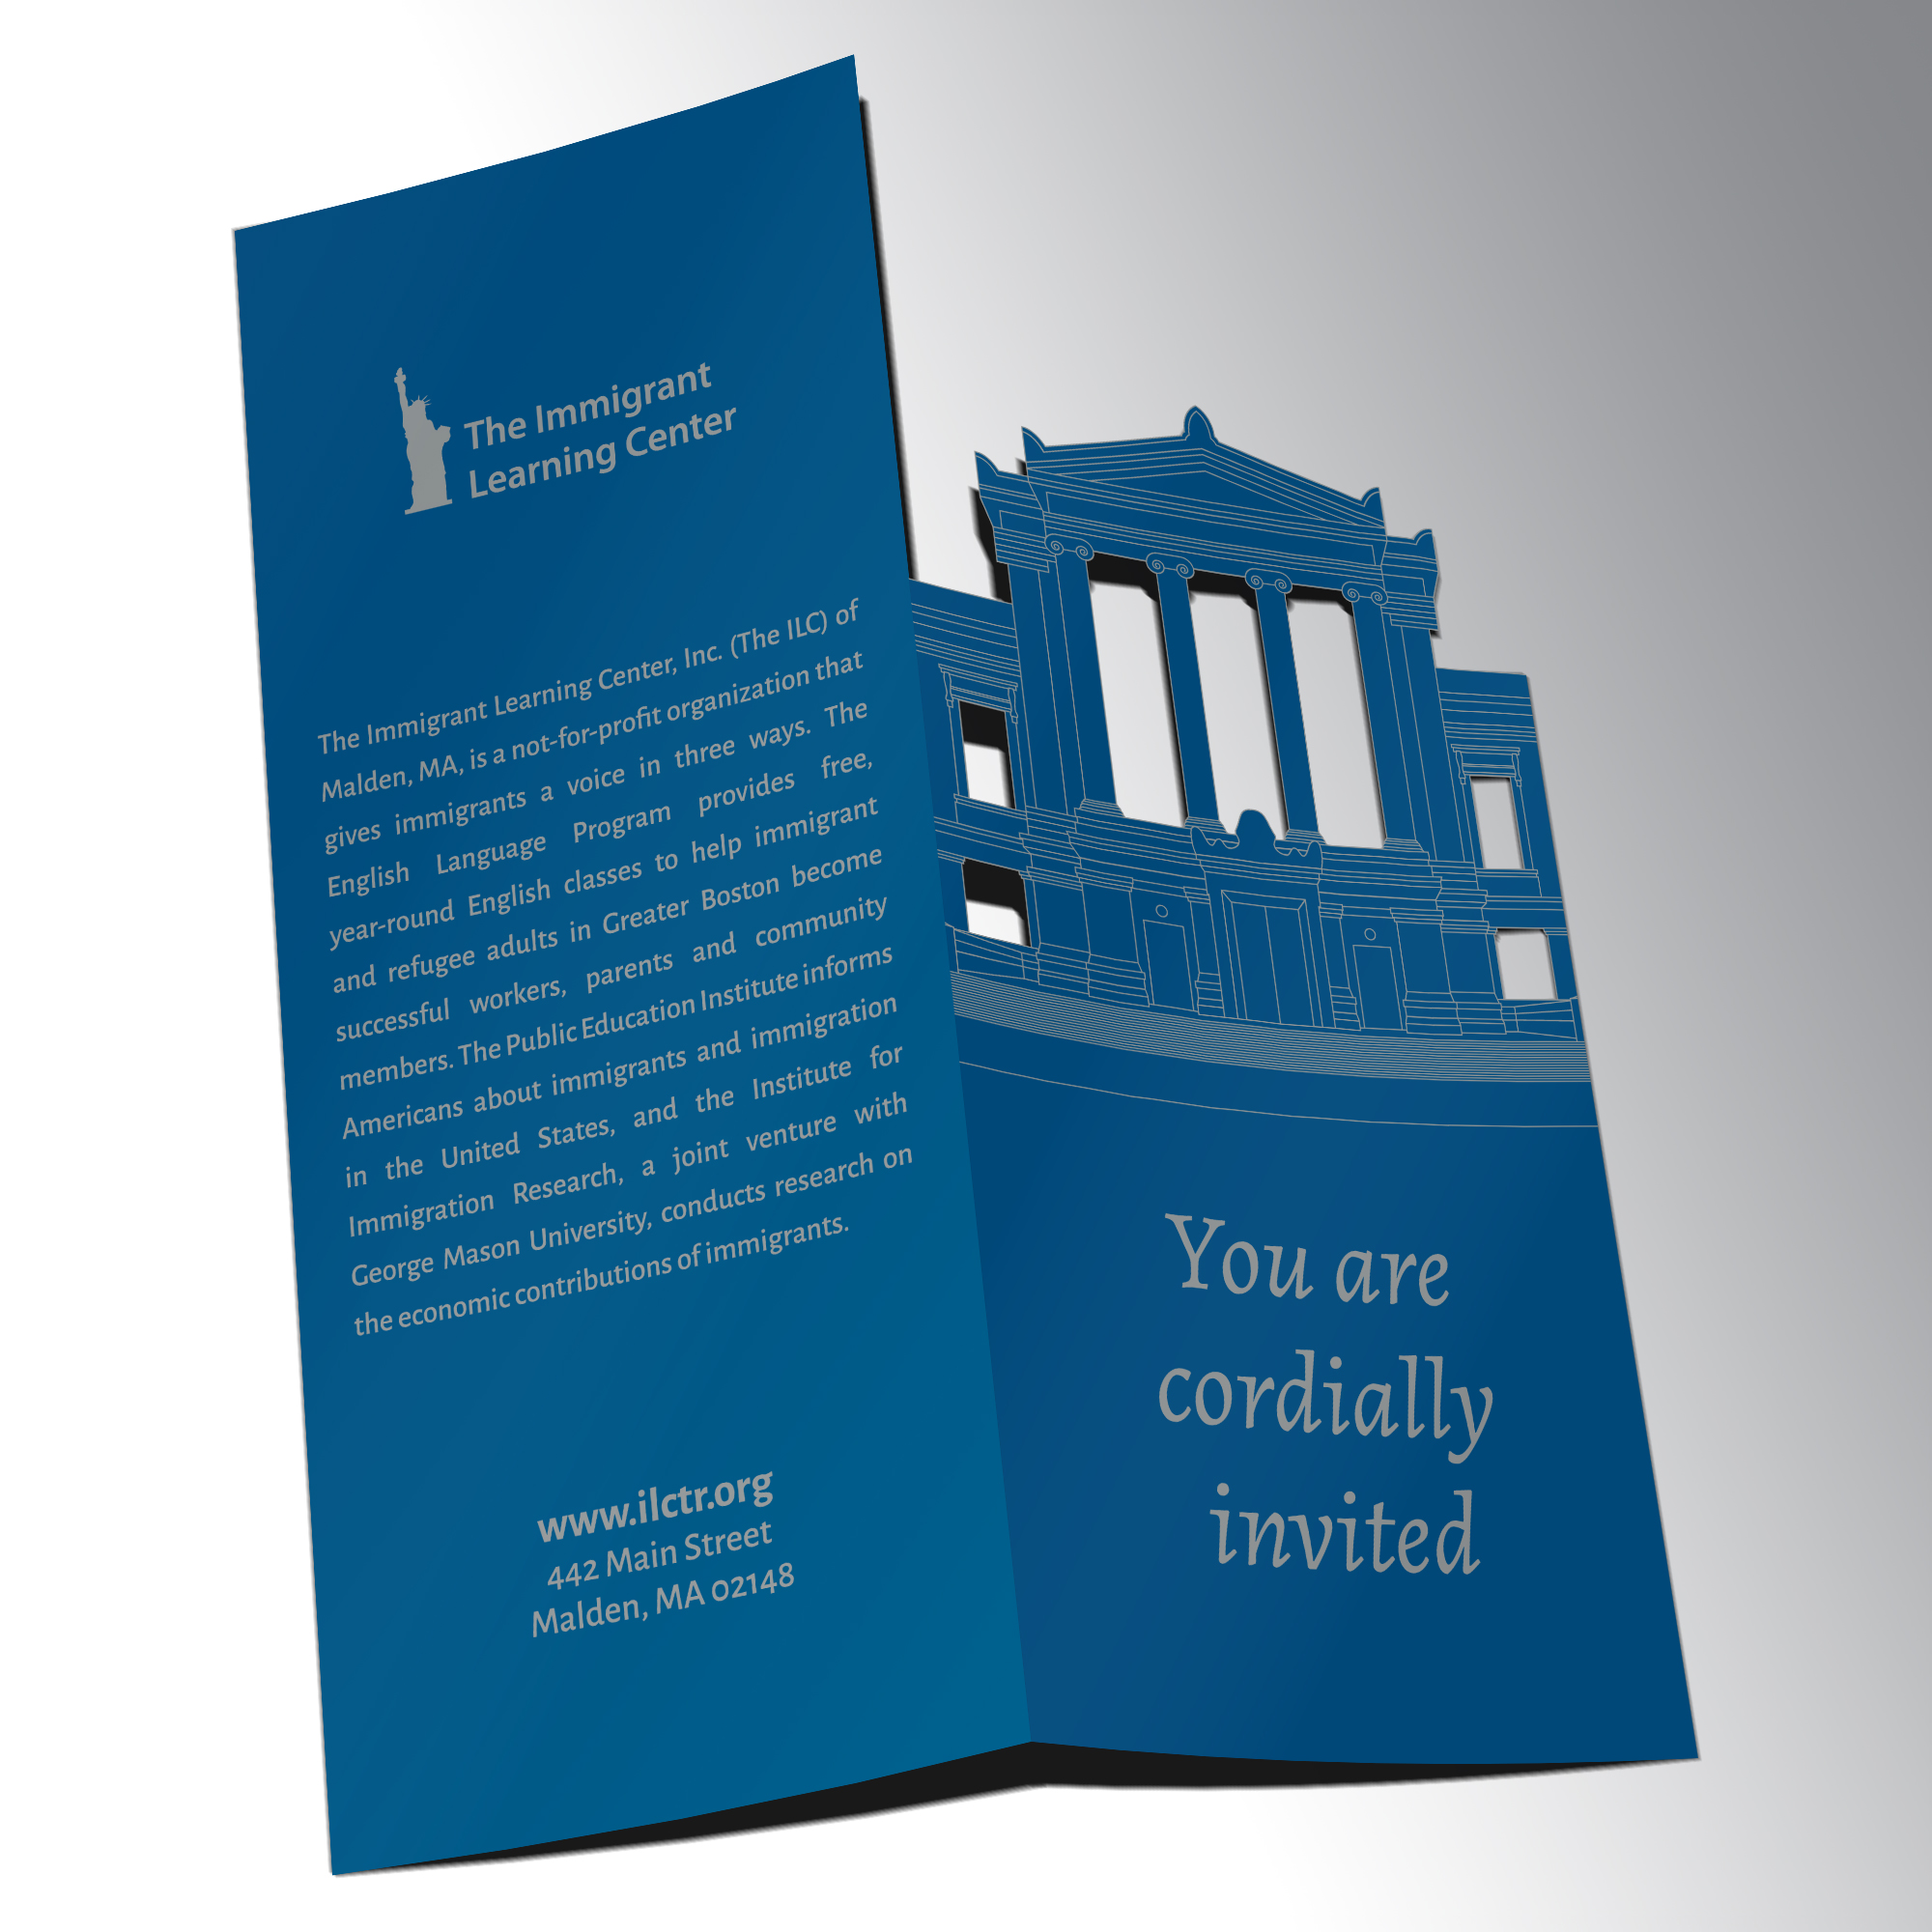 Print invitation for The Immigrant Learning Center's 30th Anniversary Gala.